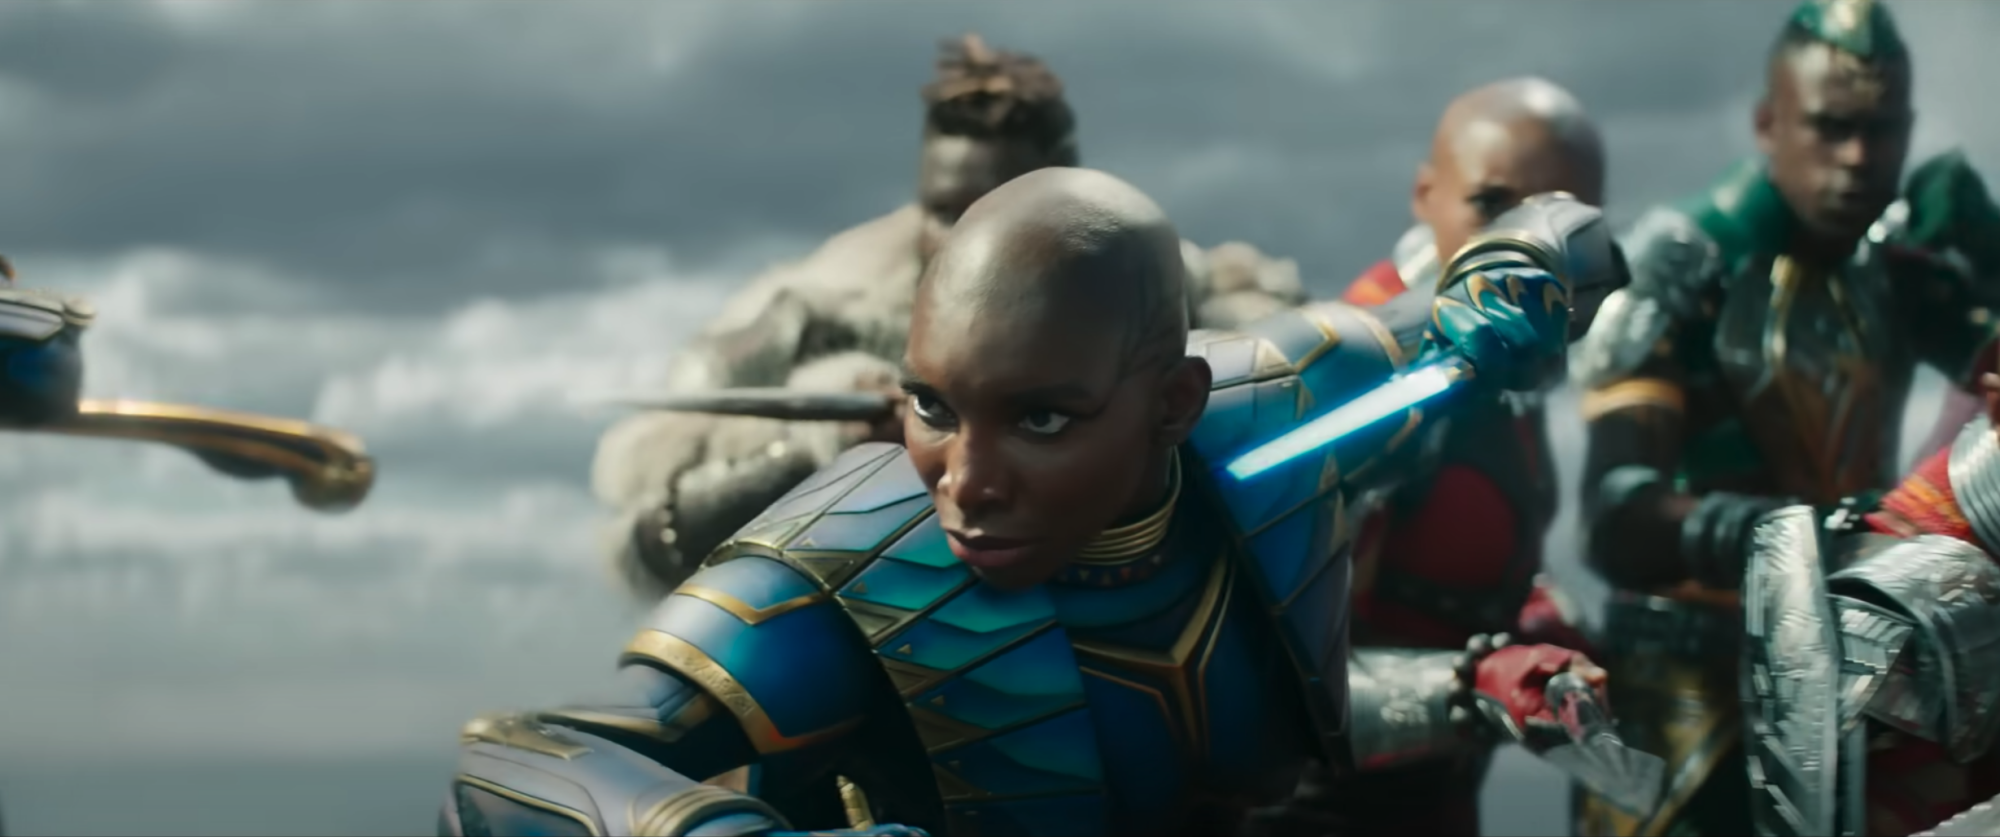 Michaela Coel as Aneka in the Midnight Angels suit, a Black woman with a shaved head wearing bright blue armor.